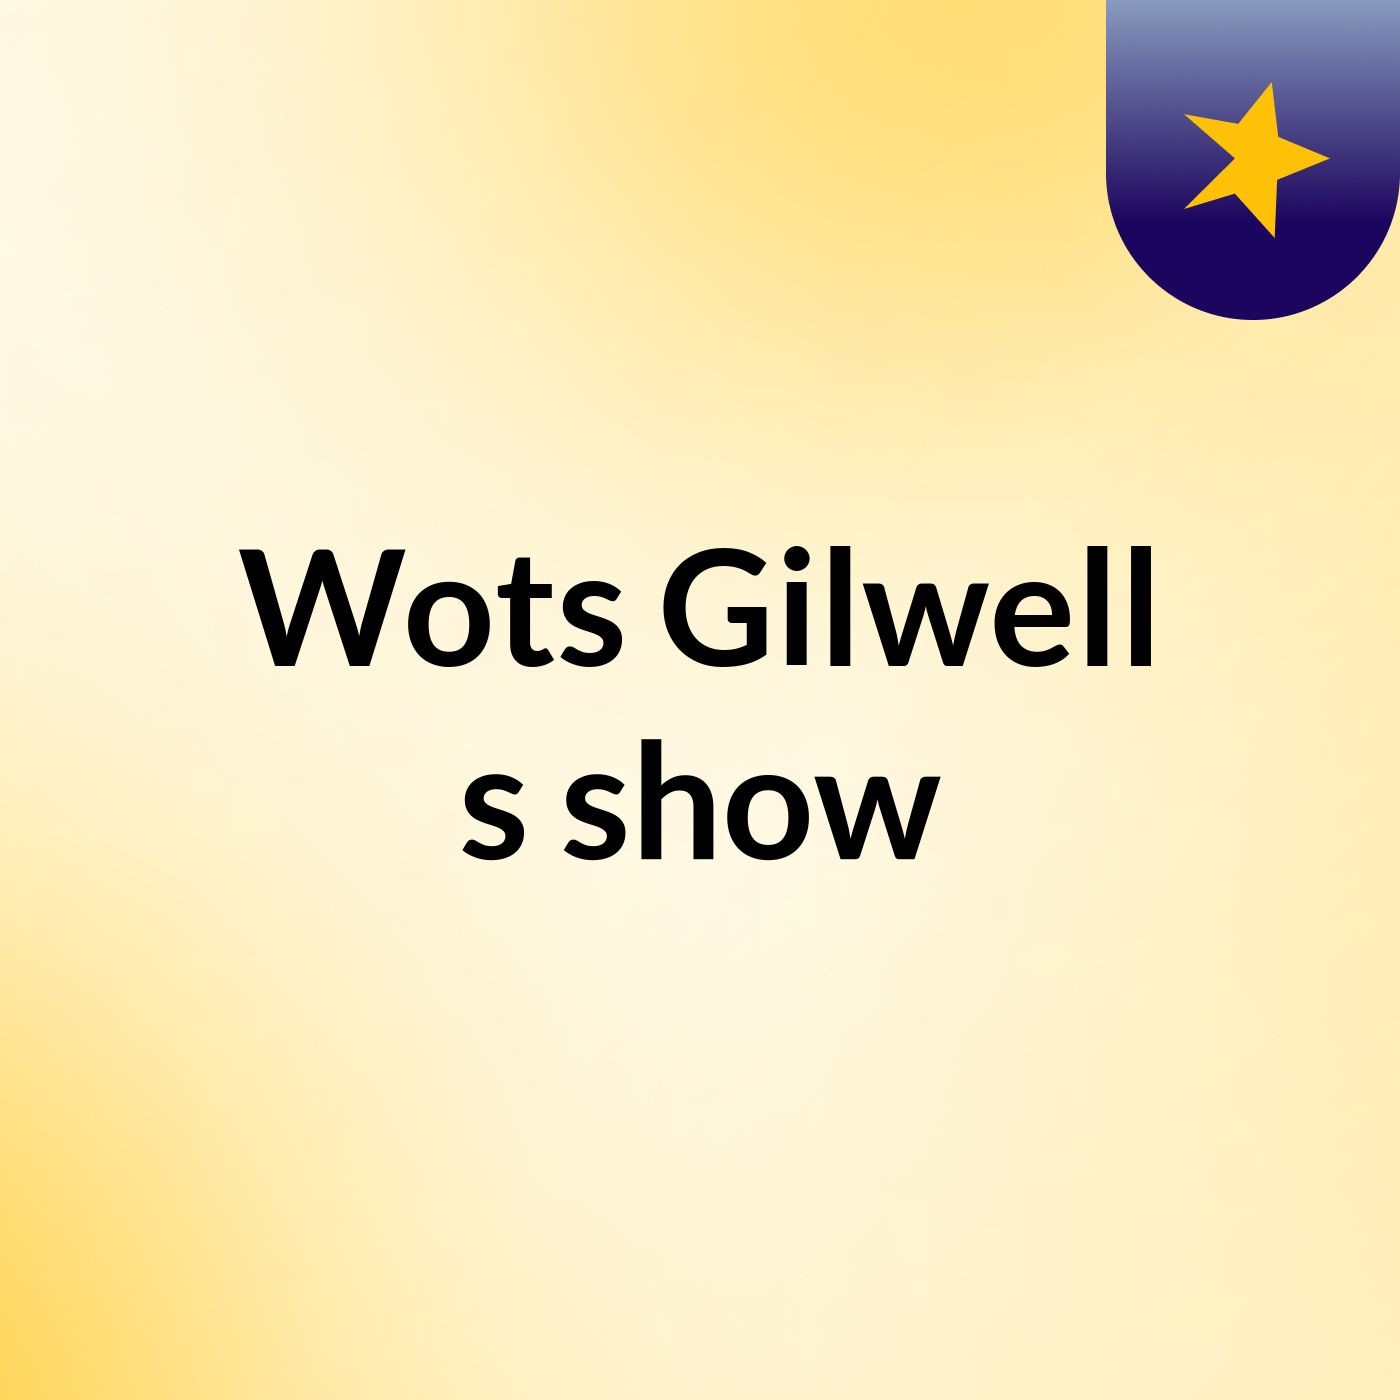 Wots Gilwell's show